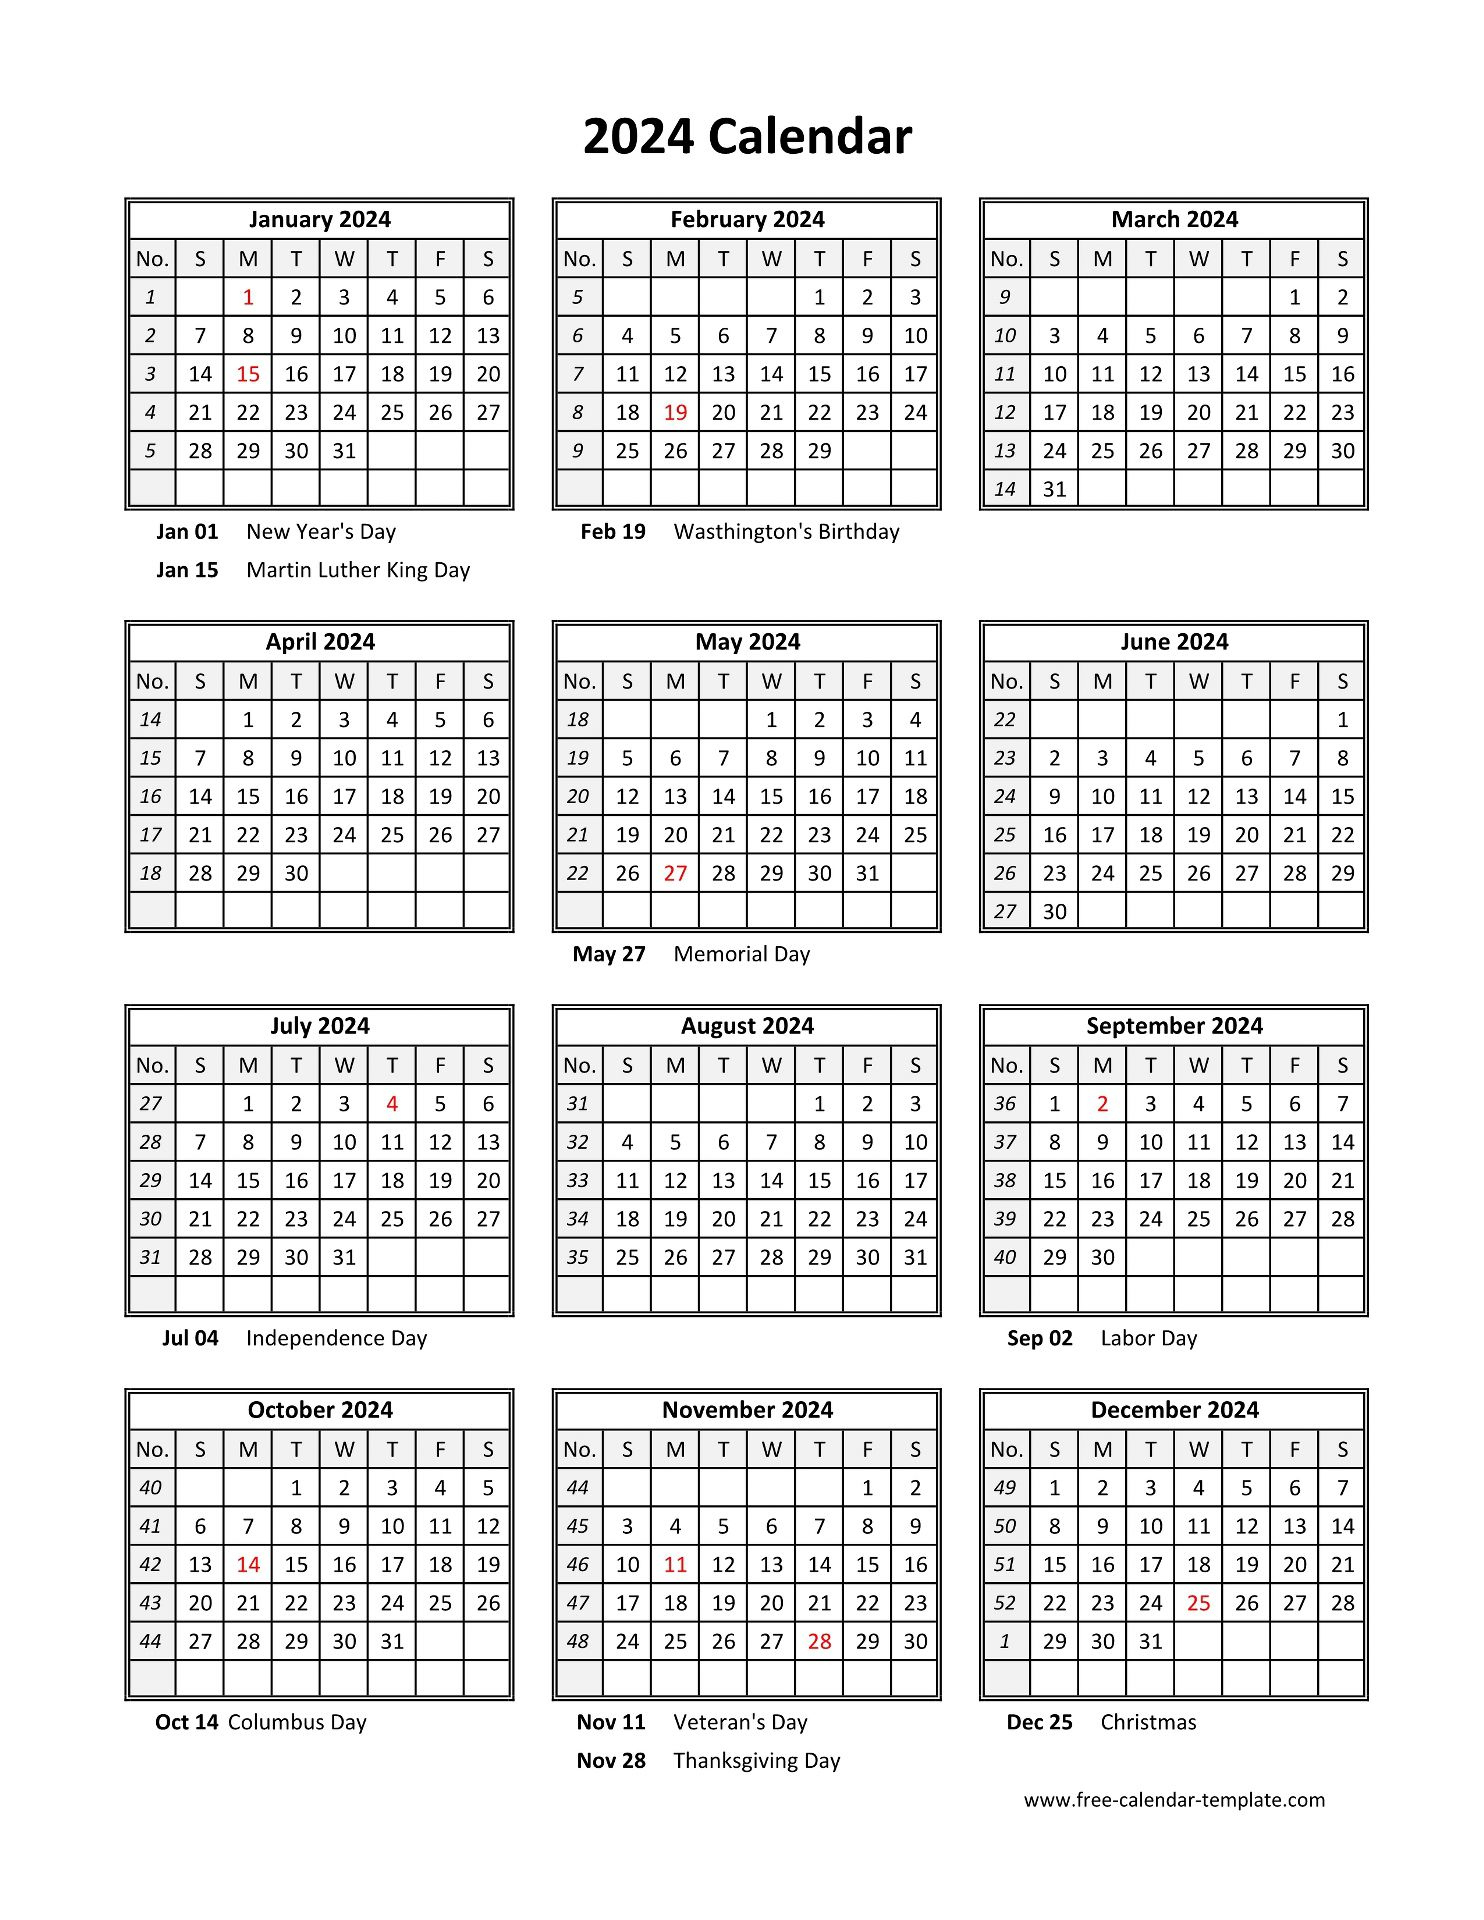 Yearly Printable Calendar 2024 With Holidays | Free-Calendar | 2024 Yearly Calendar By Month